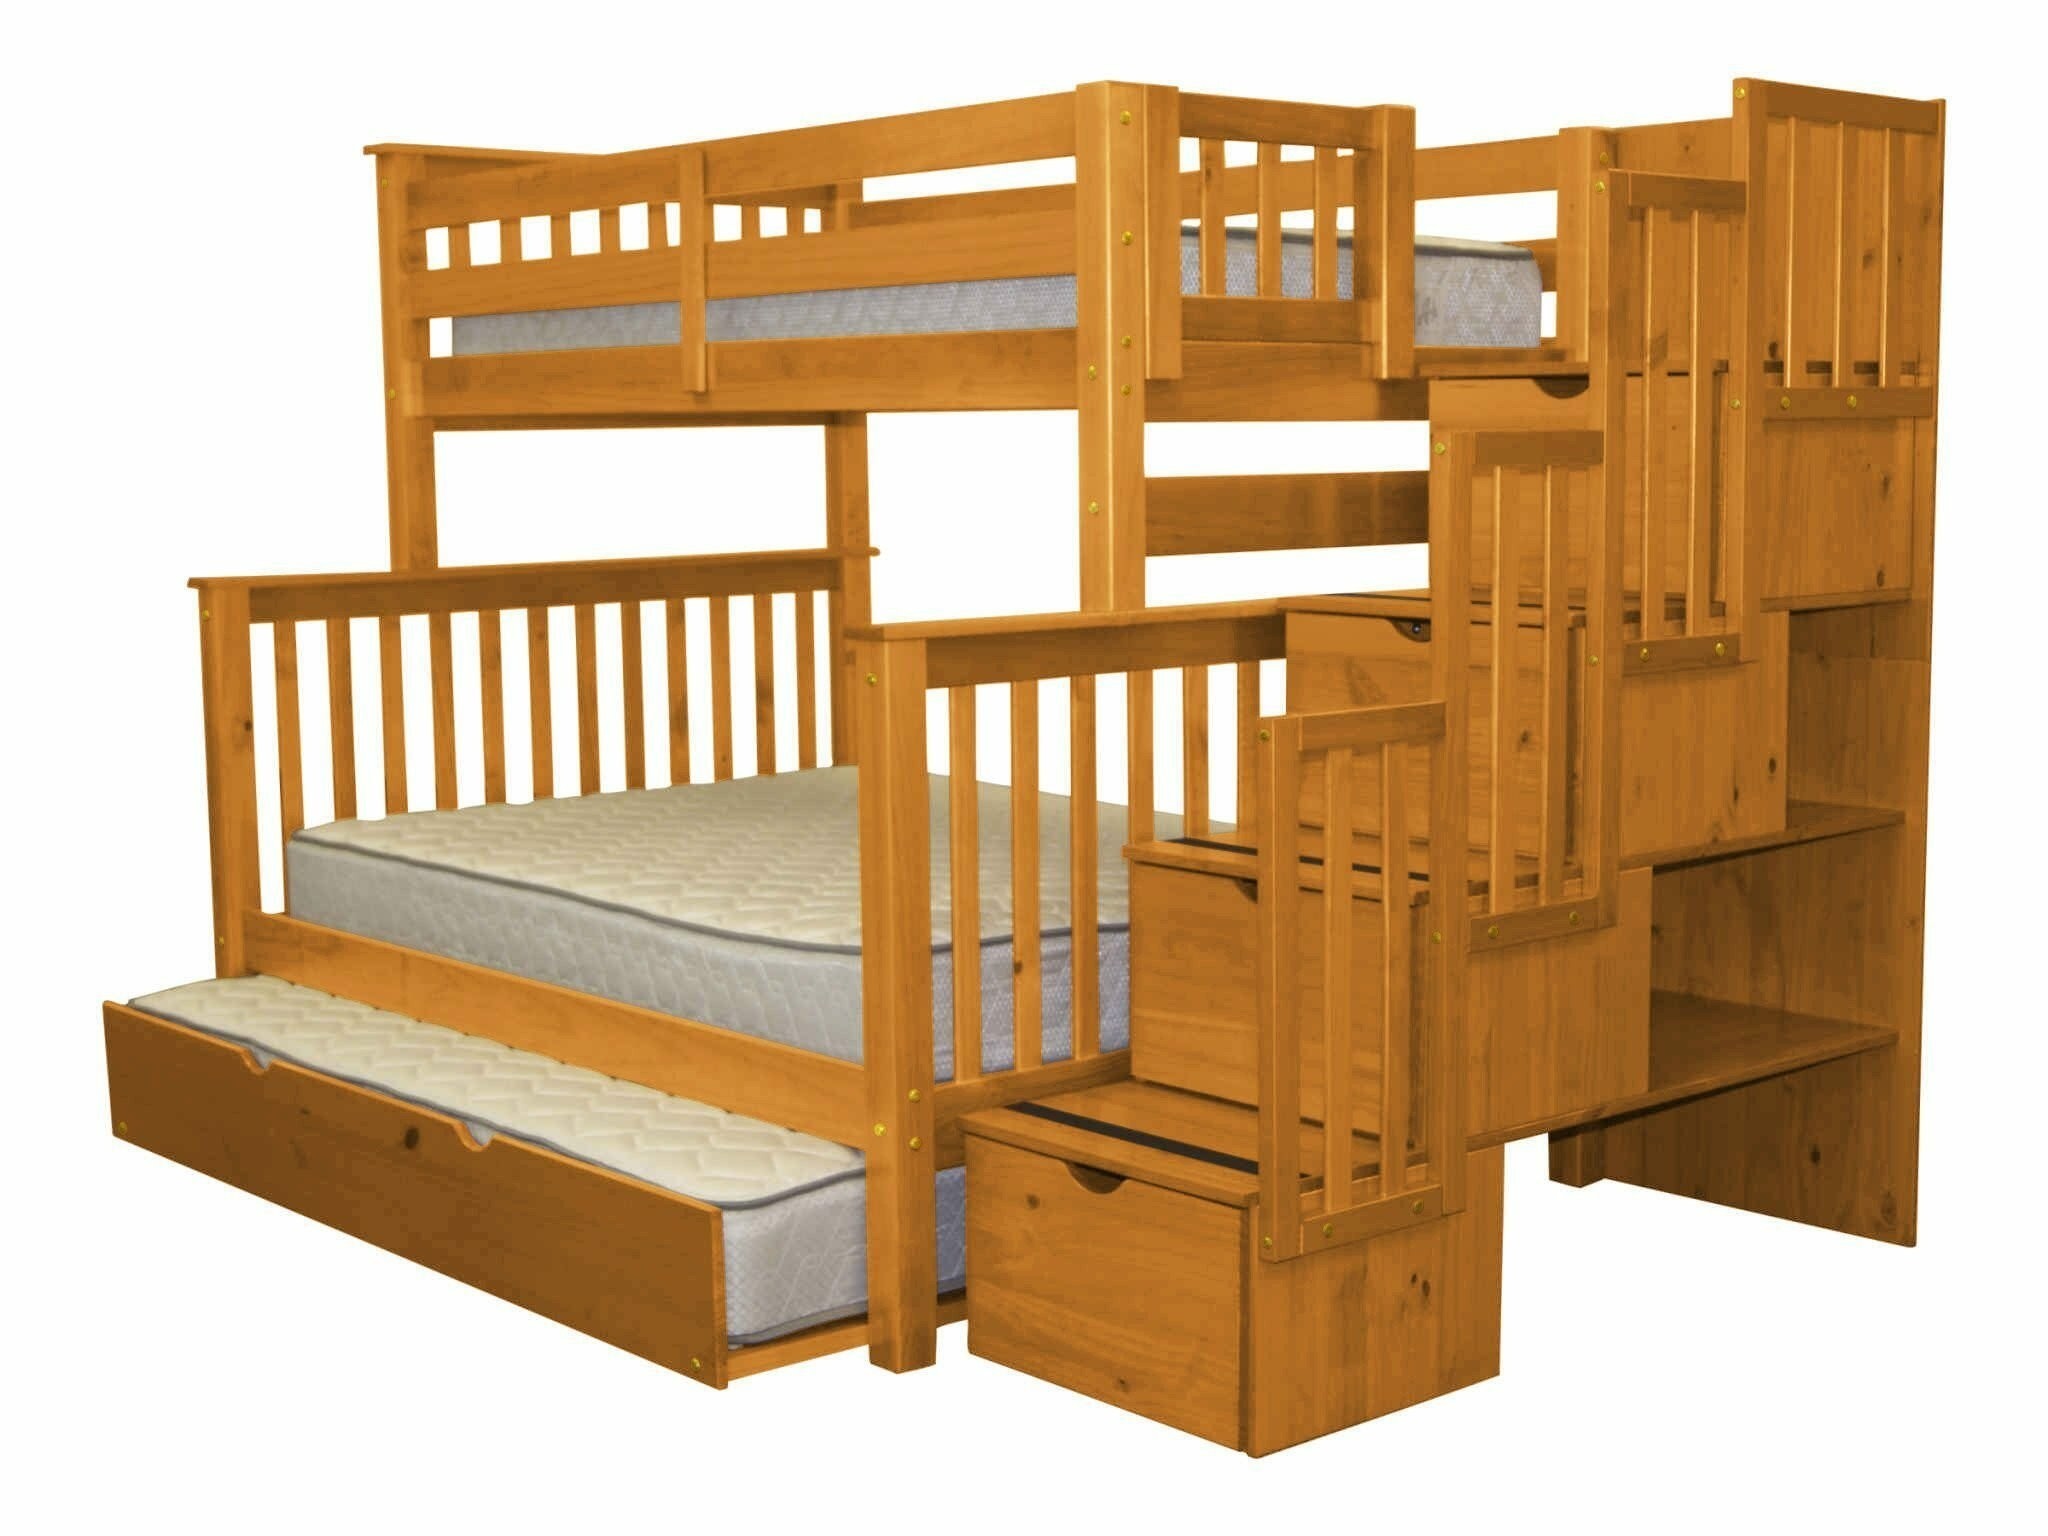 Bedz king stairway twin over full bunk bed with trundle